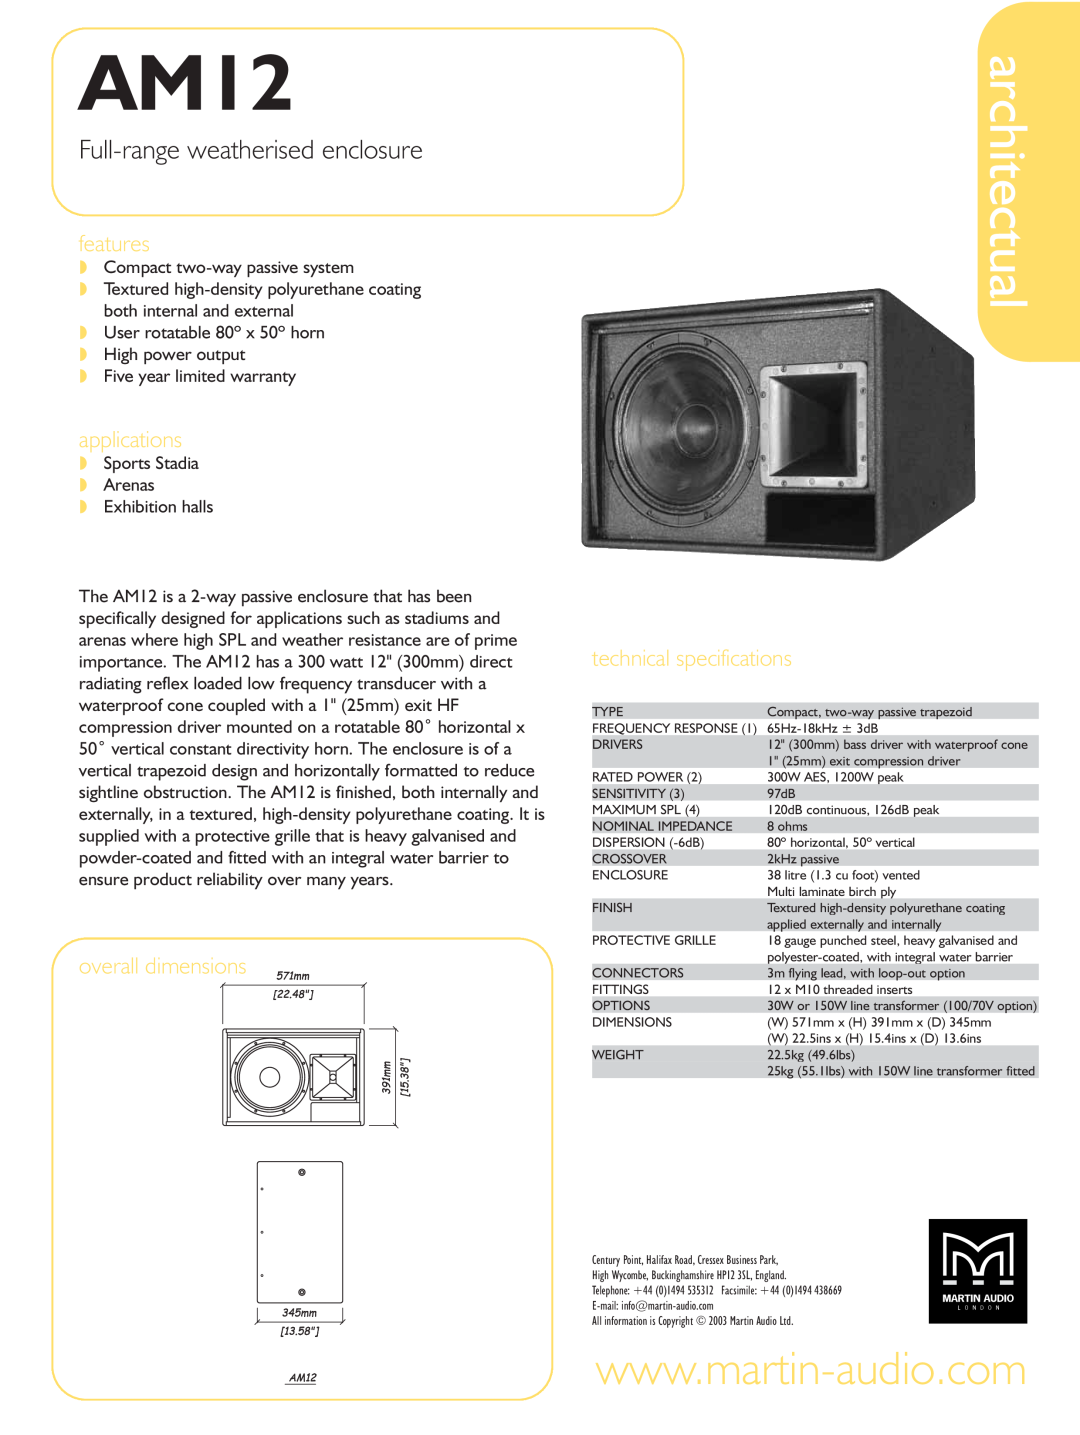 Martin Audio AM12 technical specifications architectual, Full-range weatherised enclosure, features, applications 